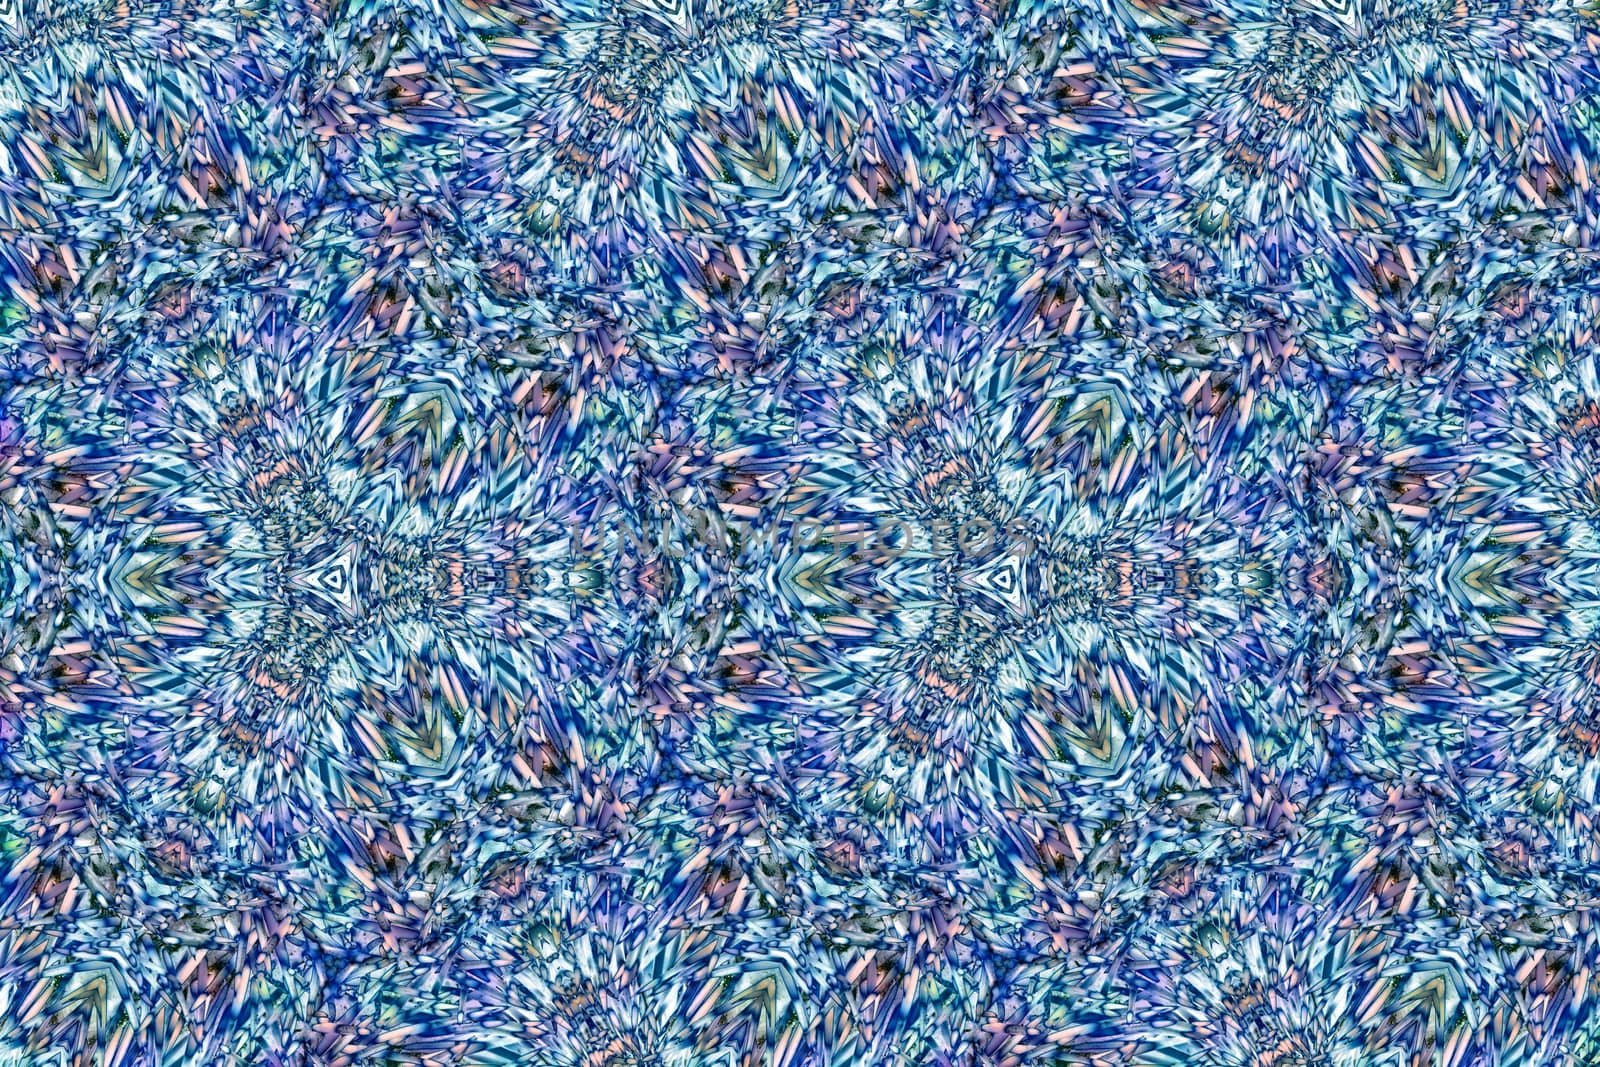 Abstract mosaic background of blue tones with fine texture